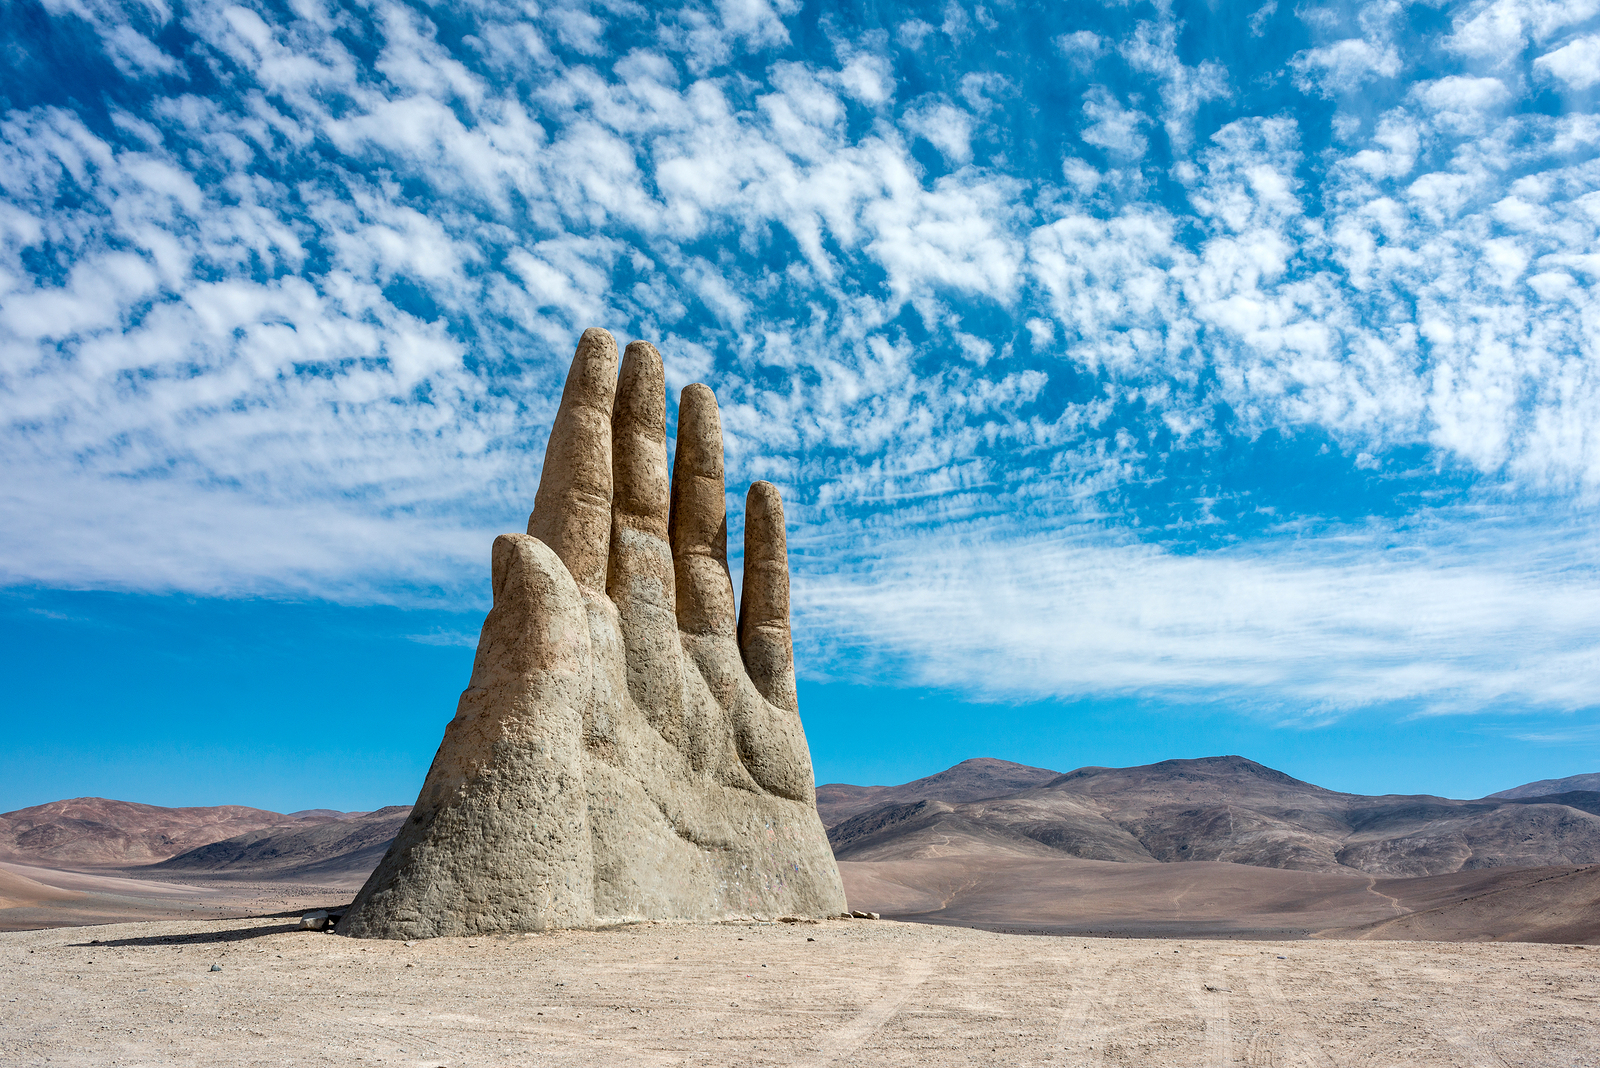 a large rock sculpture of a hand